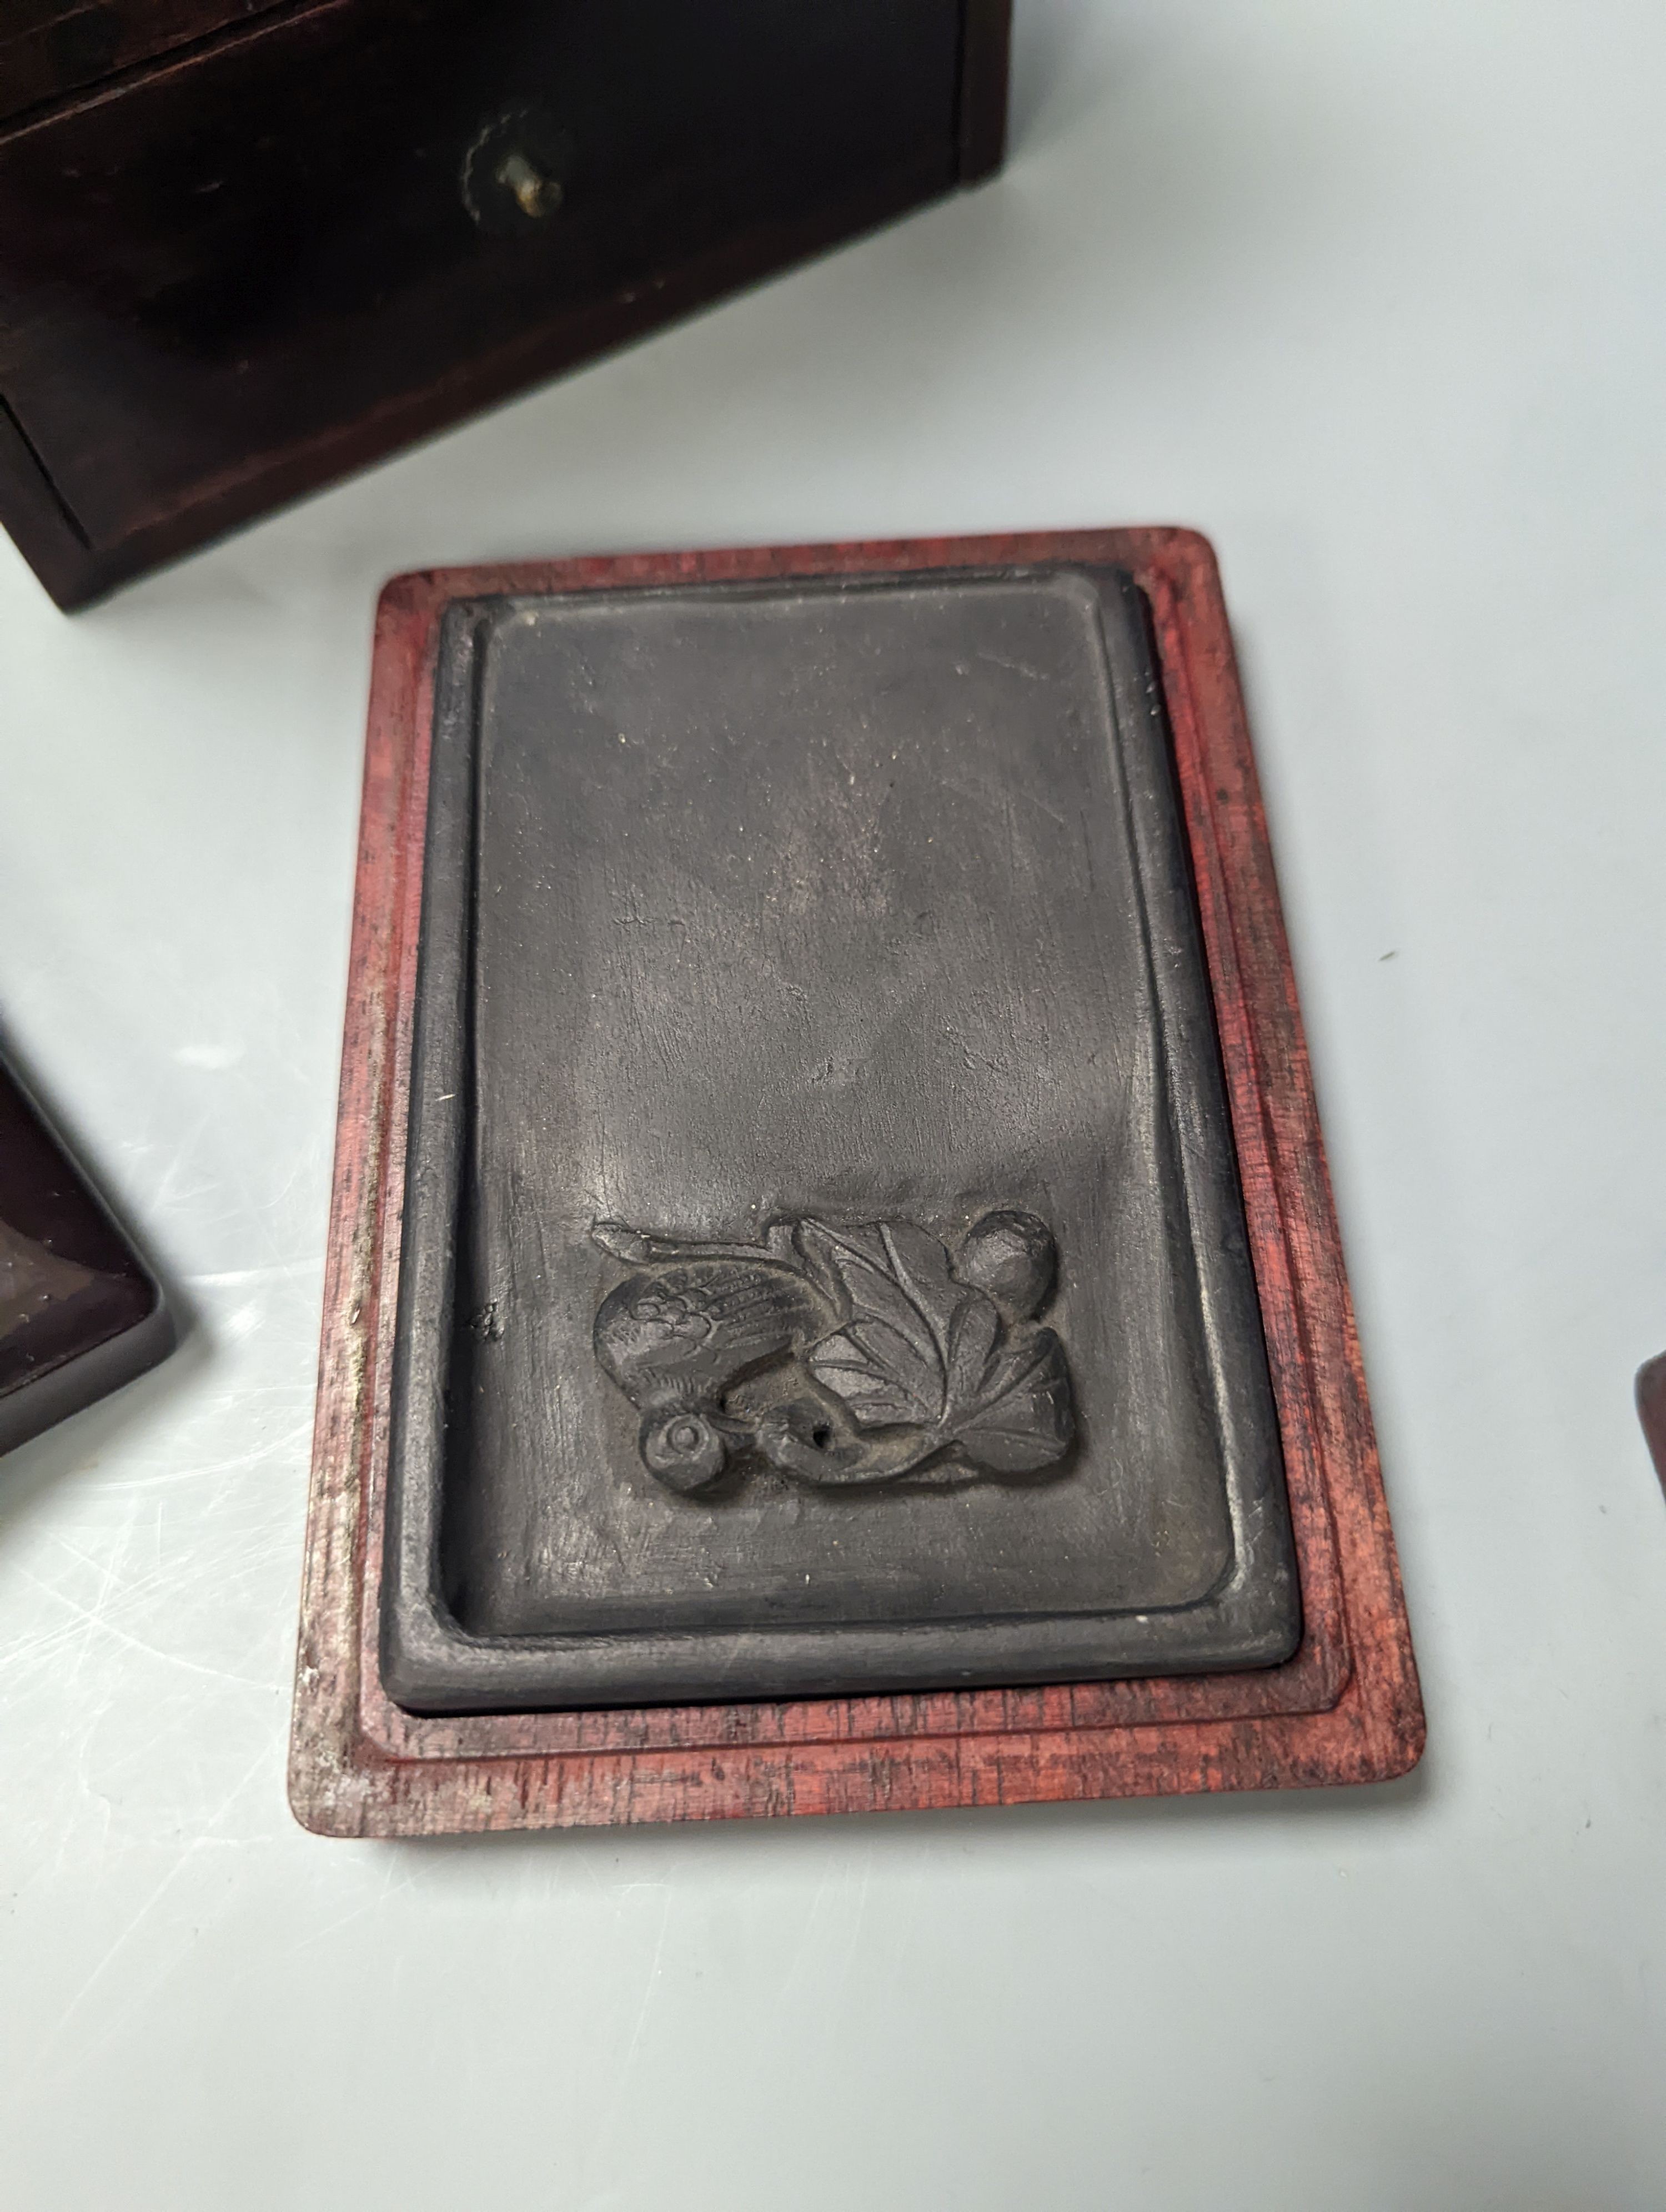 Three Chinese ink-stones, two in fitted boxes and a Japanese writing box, box 26 cms deep 14-5 wide.